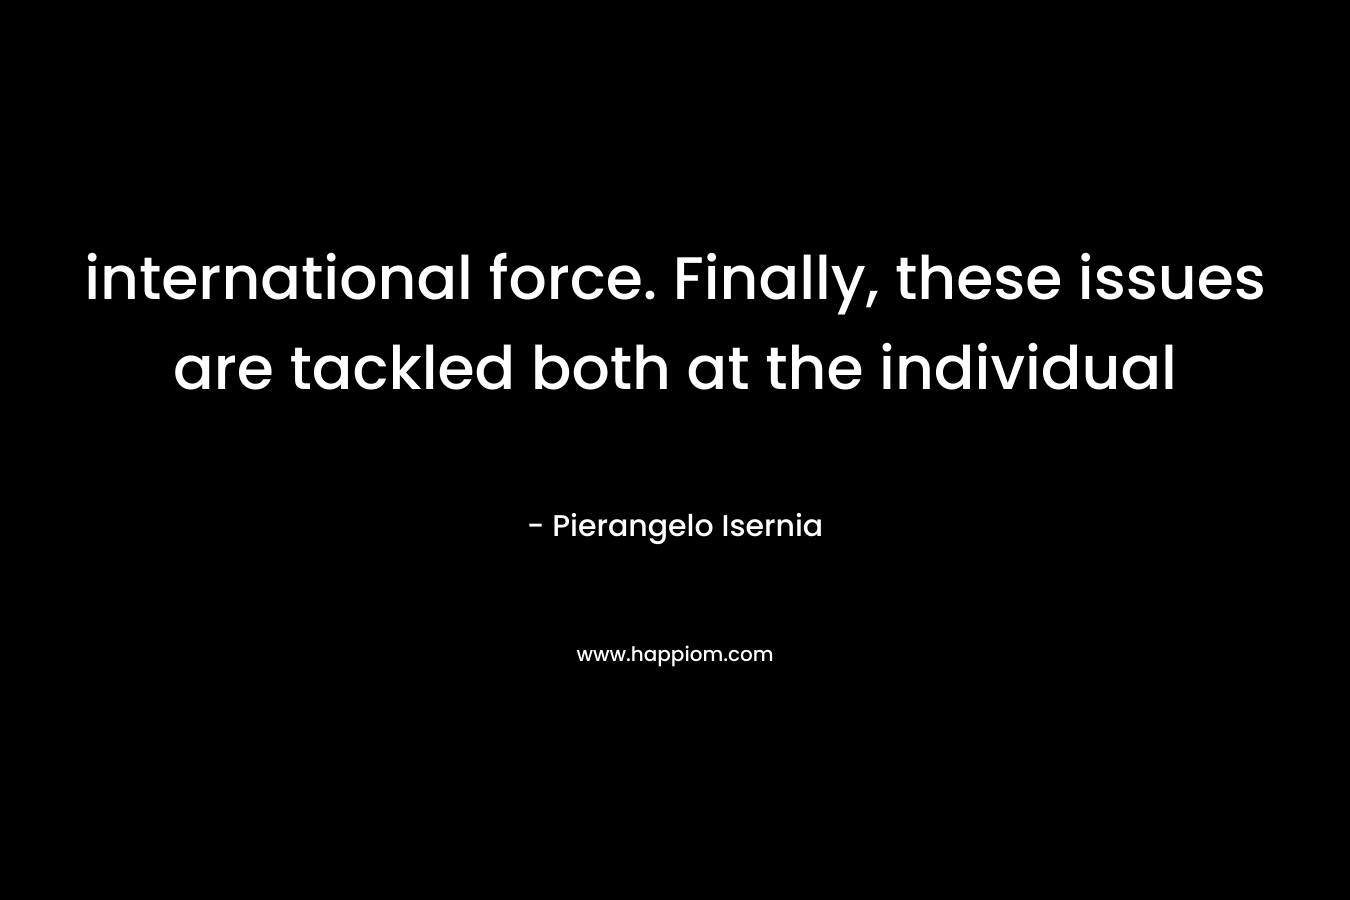 international force. Finally, these issues are tackled both at the individual – Pierangelo Isernia